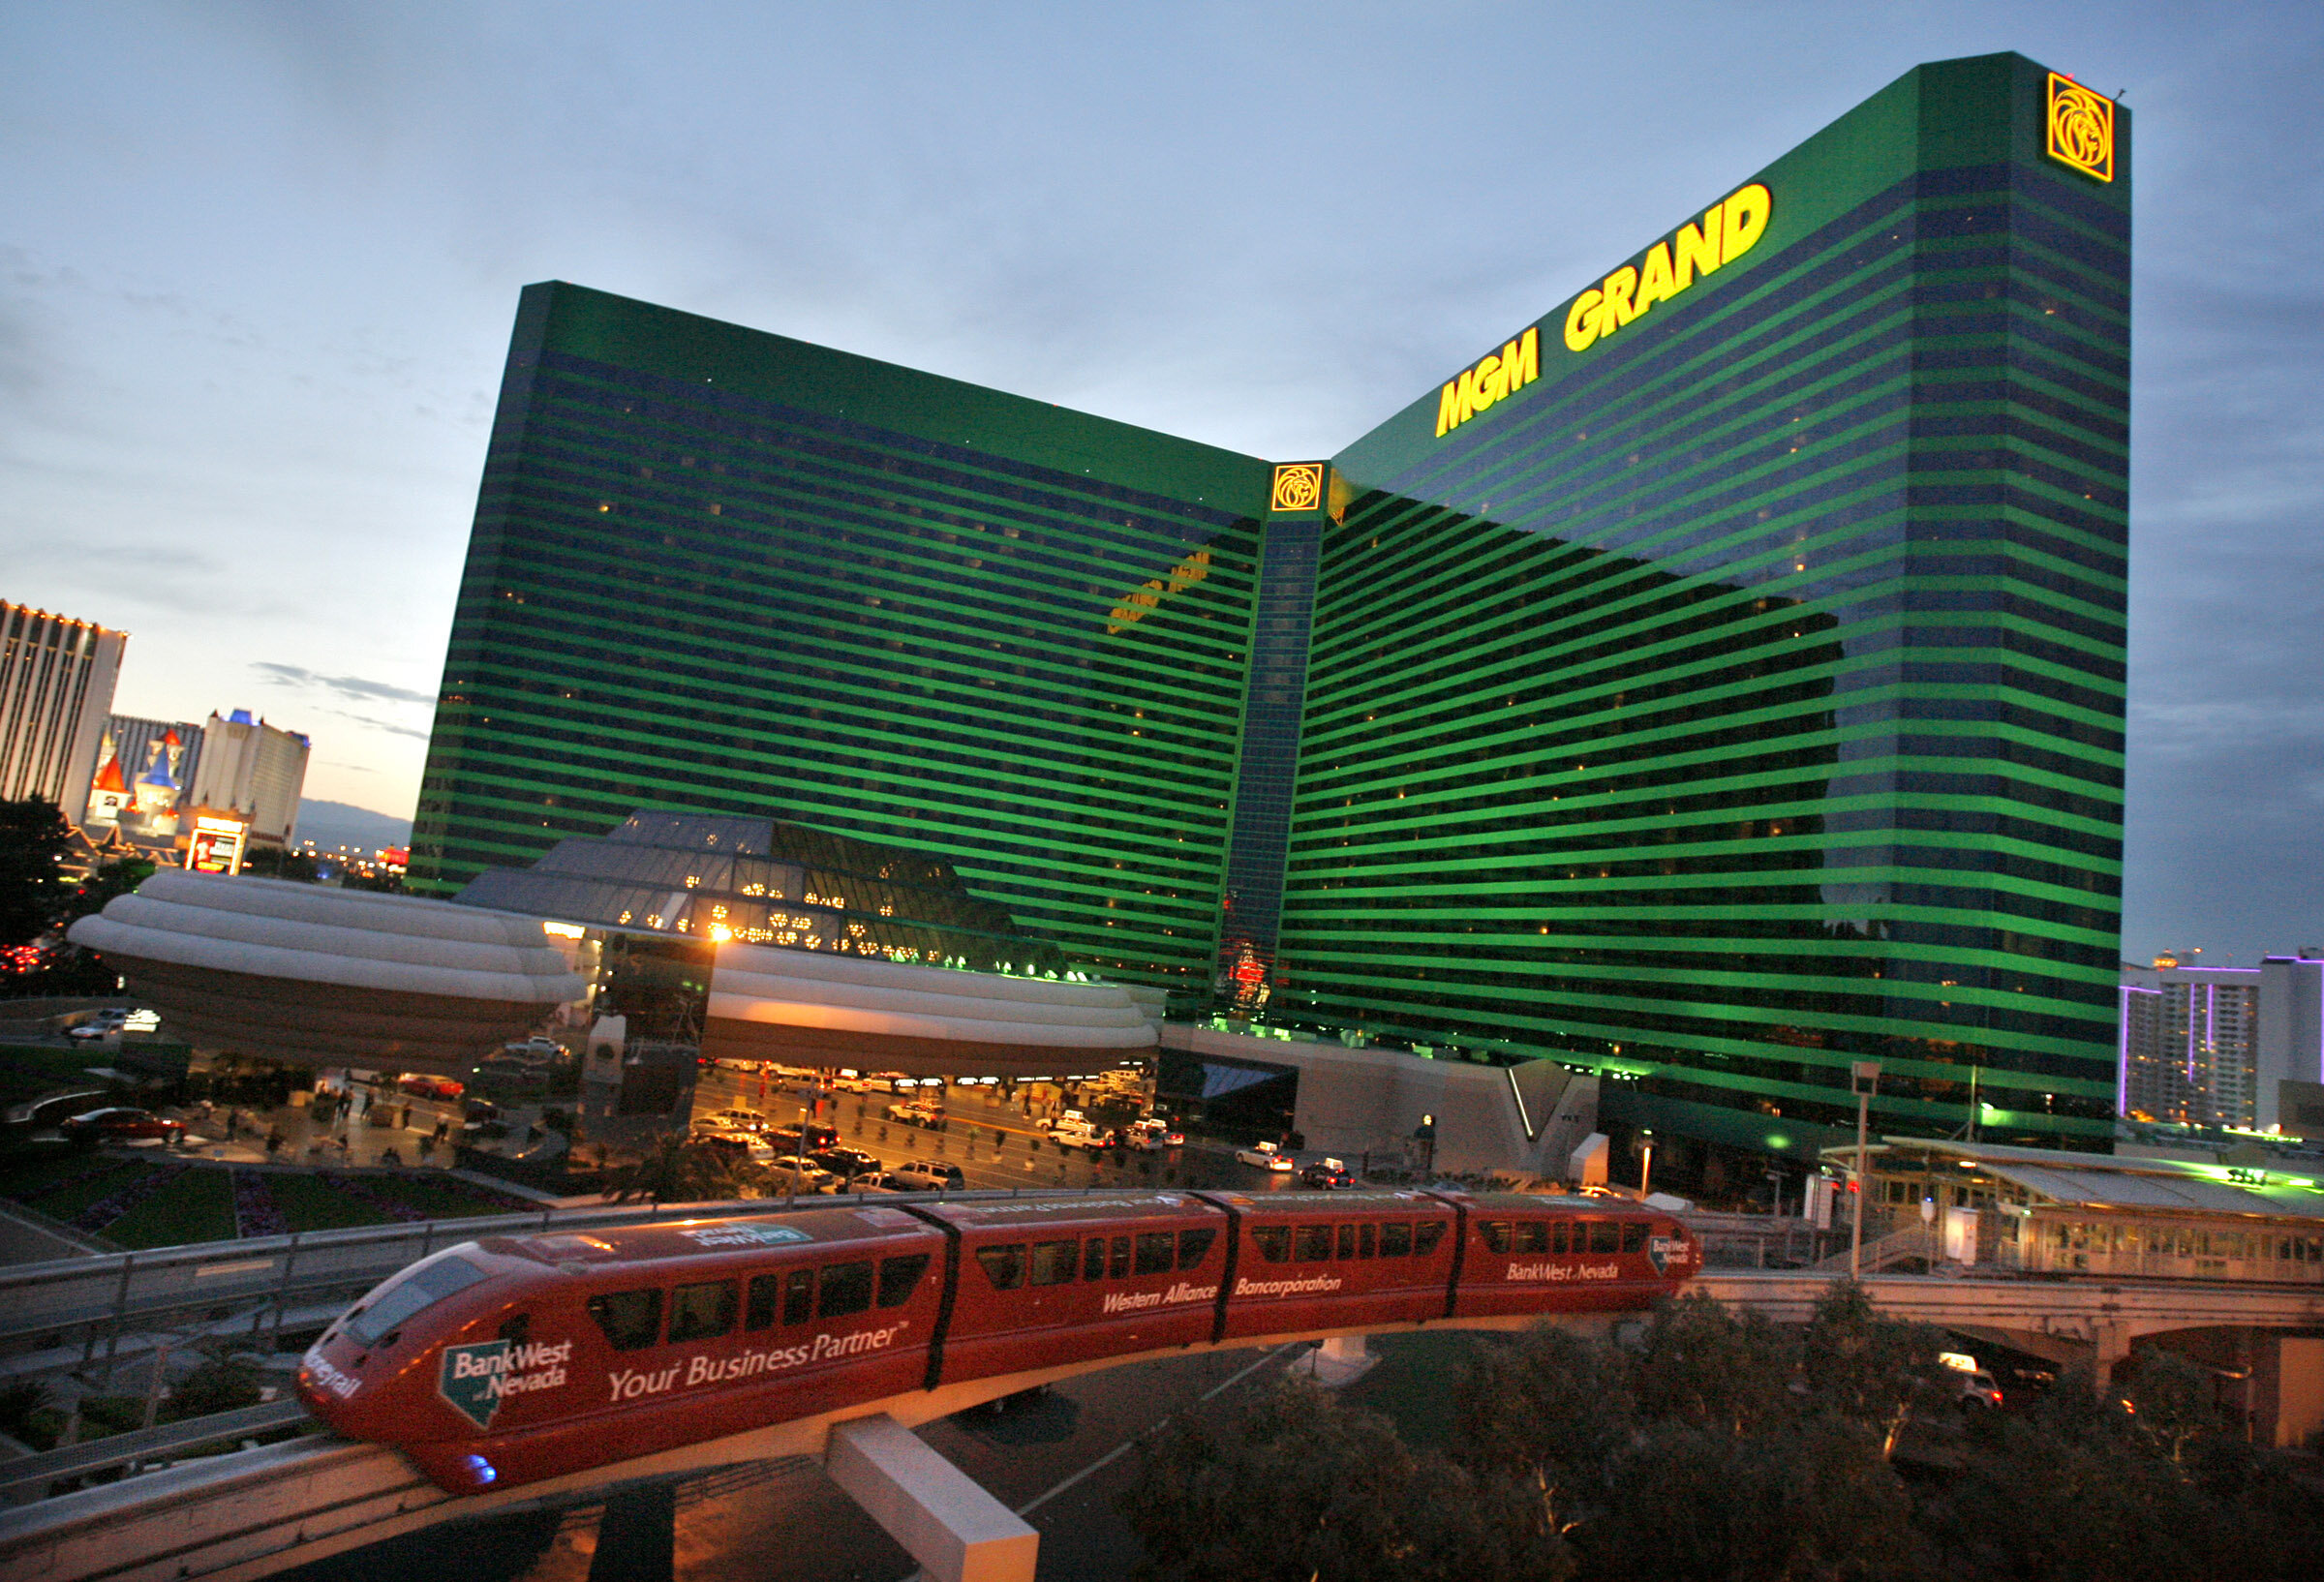 Two Vegas casinos fell victim to cyberattacks, shattering the image of  impenetrable casino security